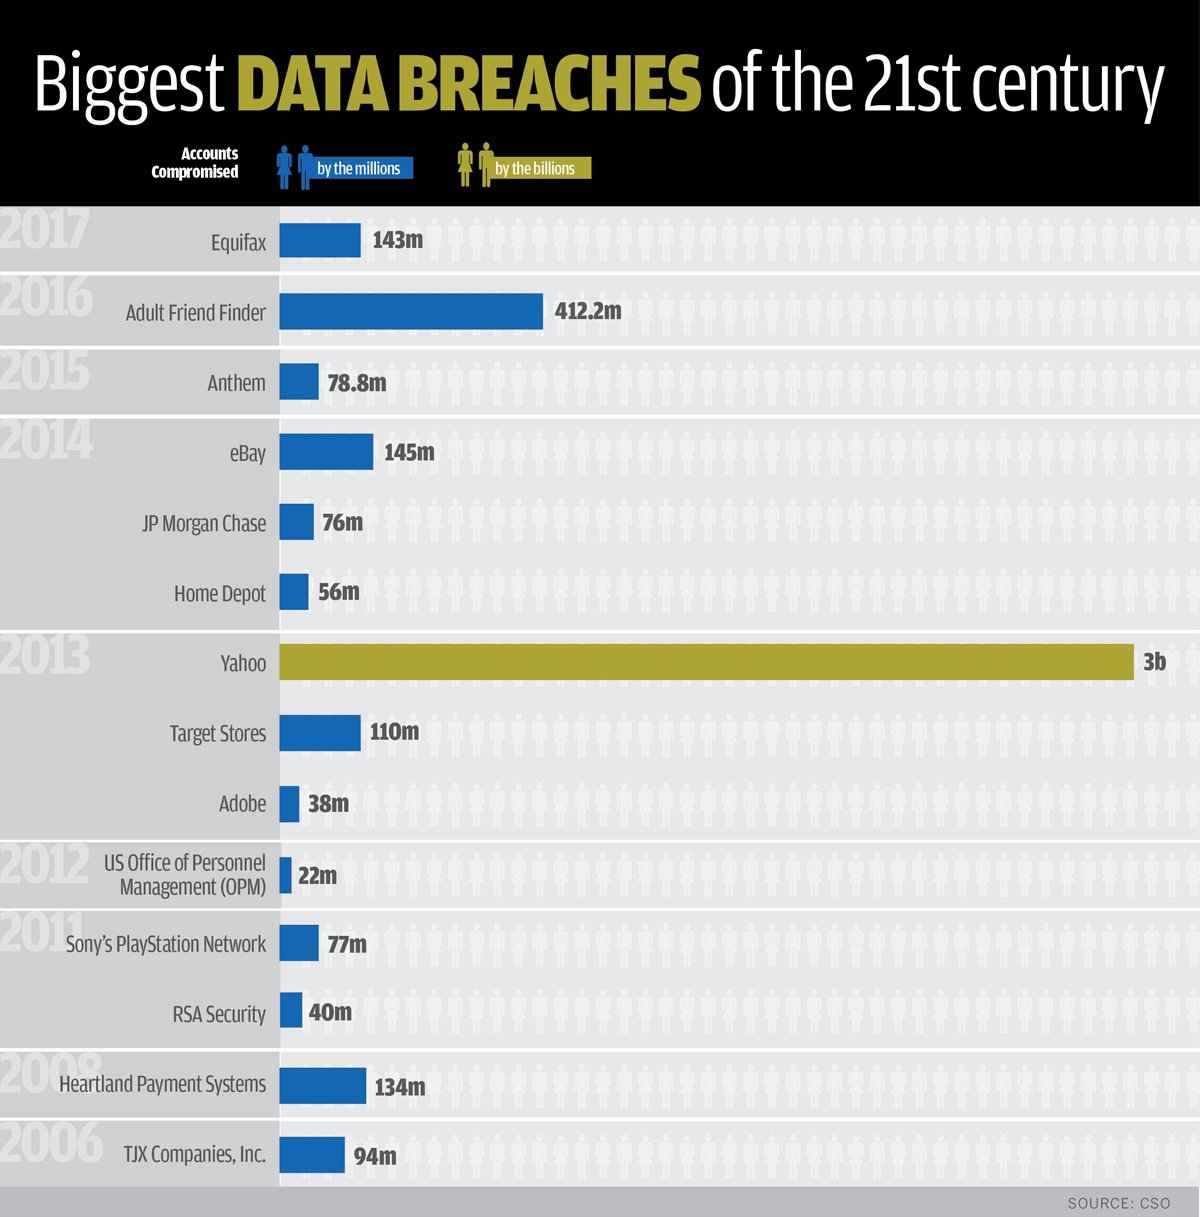 biggest-data-breaches-by-year-and-accounts-compromised-1-100738435-orig